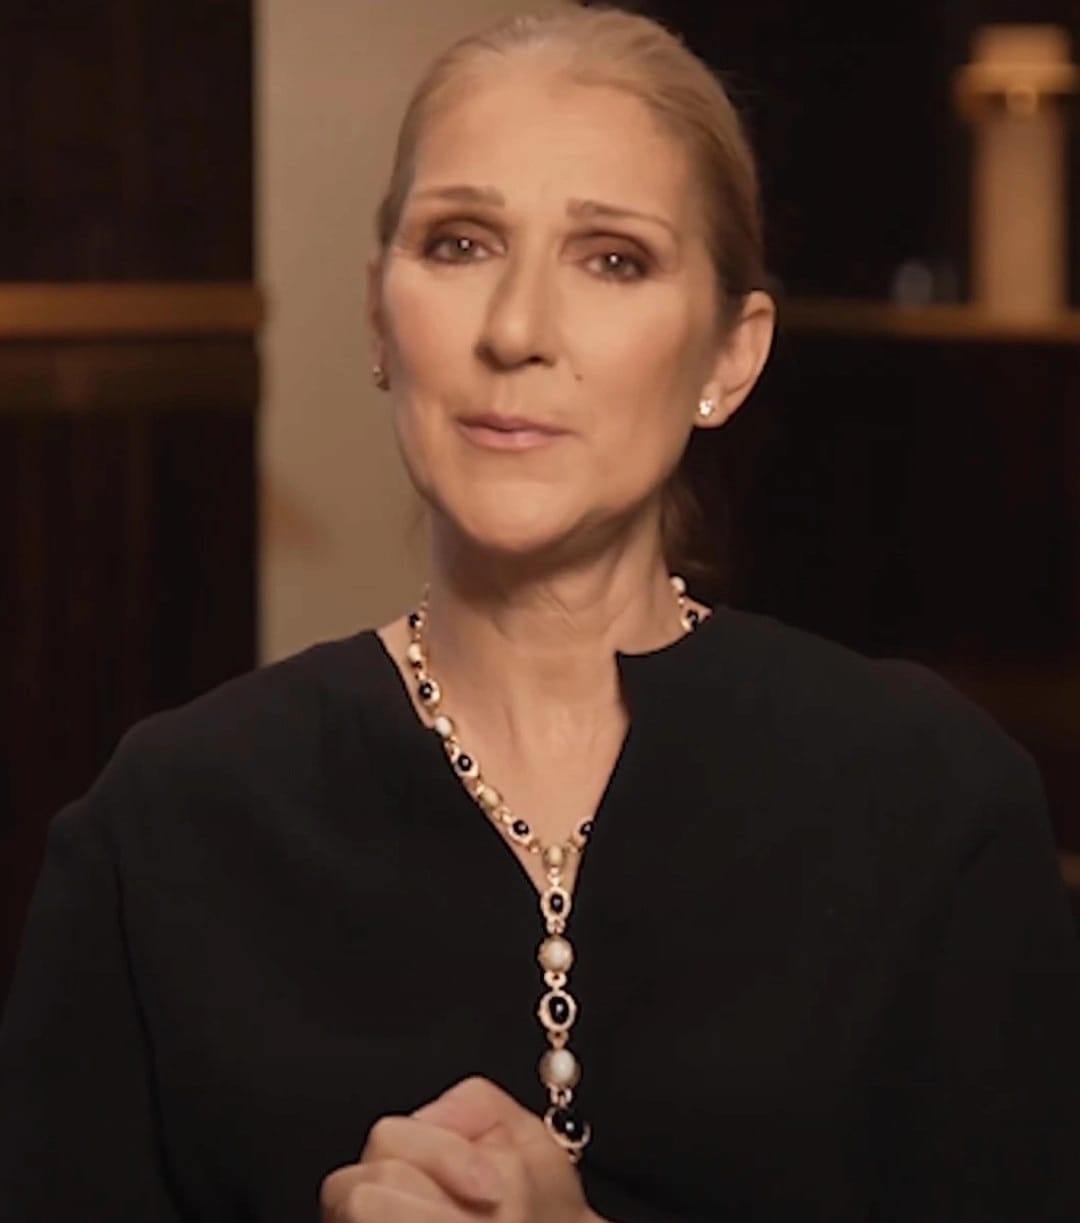 Celine Dion Postpones Tour Dates After Being Diagnosed With Incurable Disease